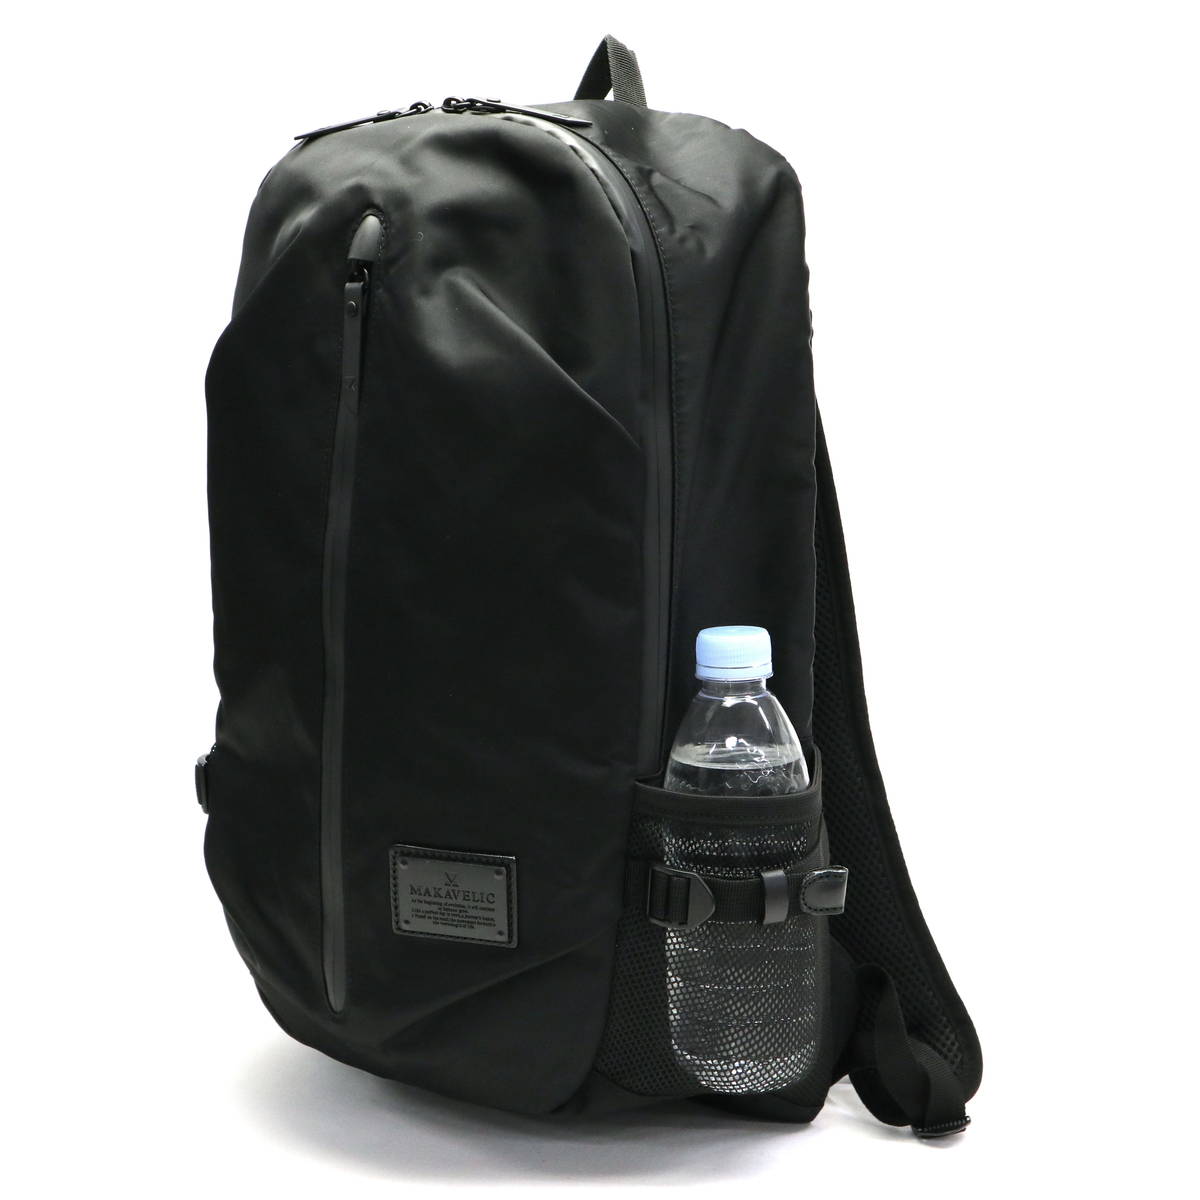 MAKAVELIC マキャベリック COCOON BACKPACK BLACKEDITION G3106-10115 